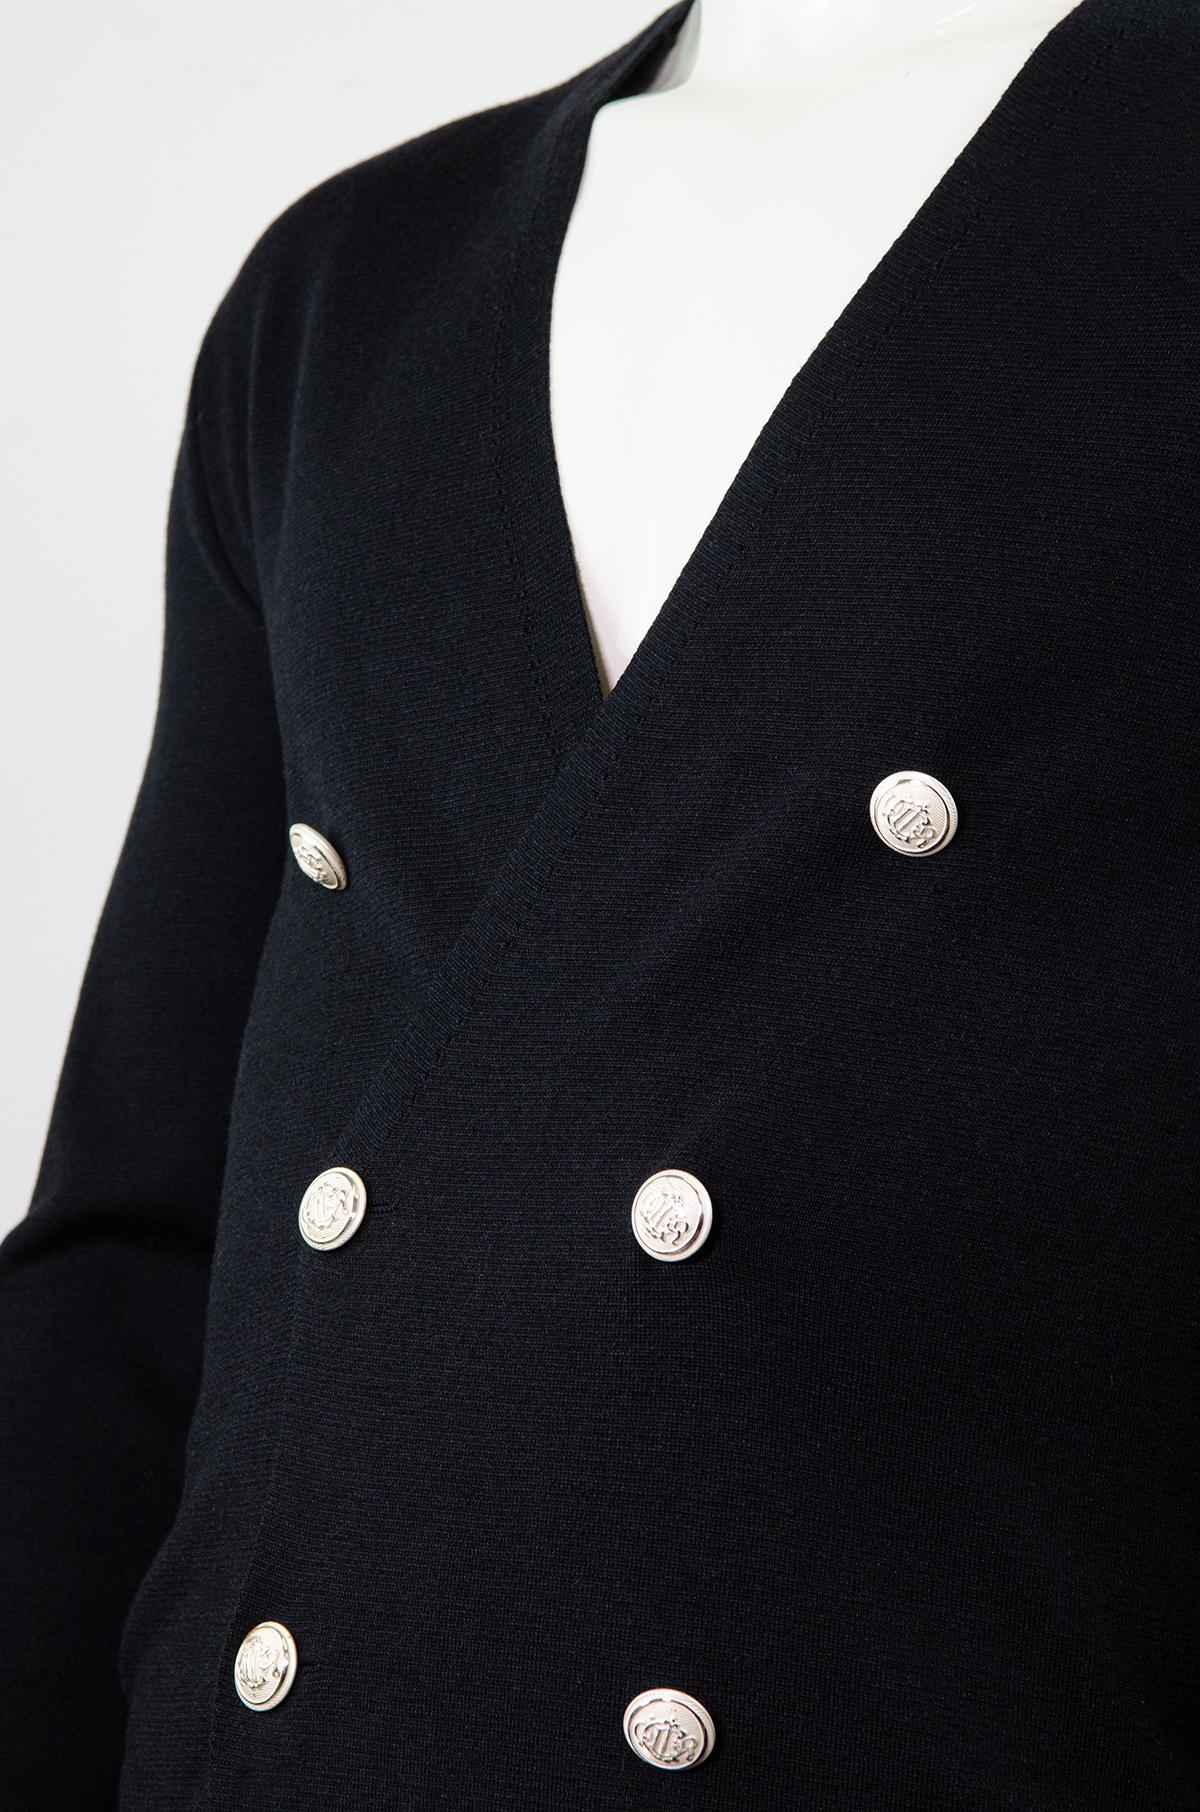 DIOR HOMME By KRIS VAN ASSCHE F/W 2013 Double-breasted Cardigan In Excellent Condition For Sale In Berlin, BE